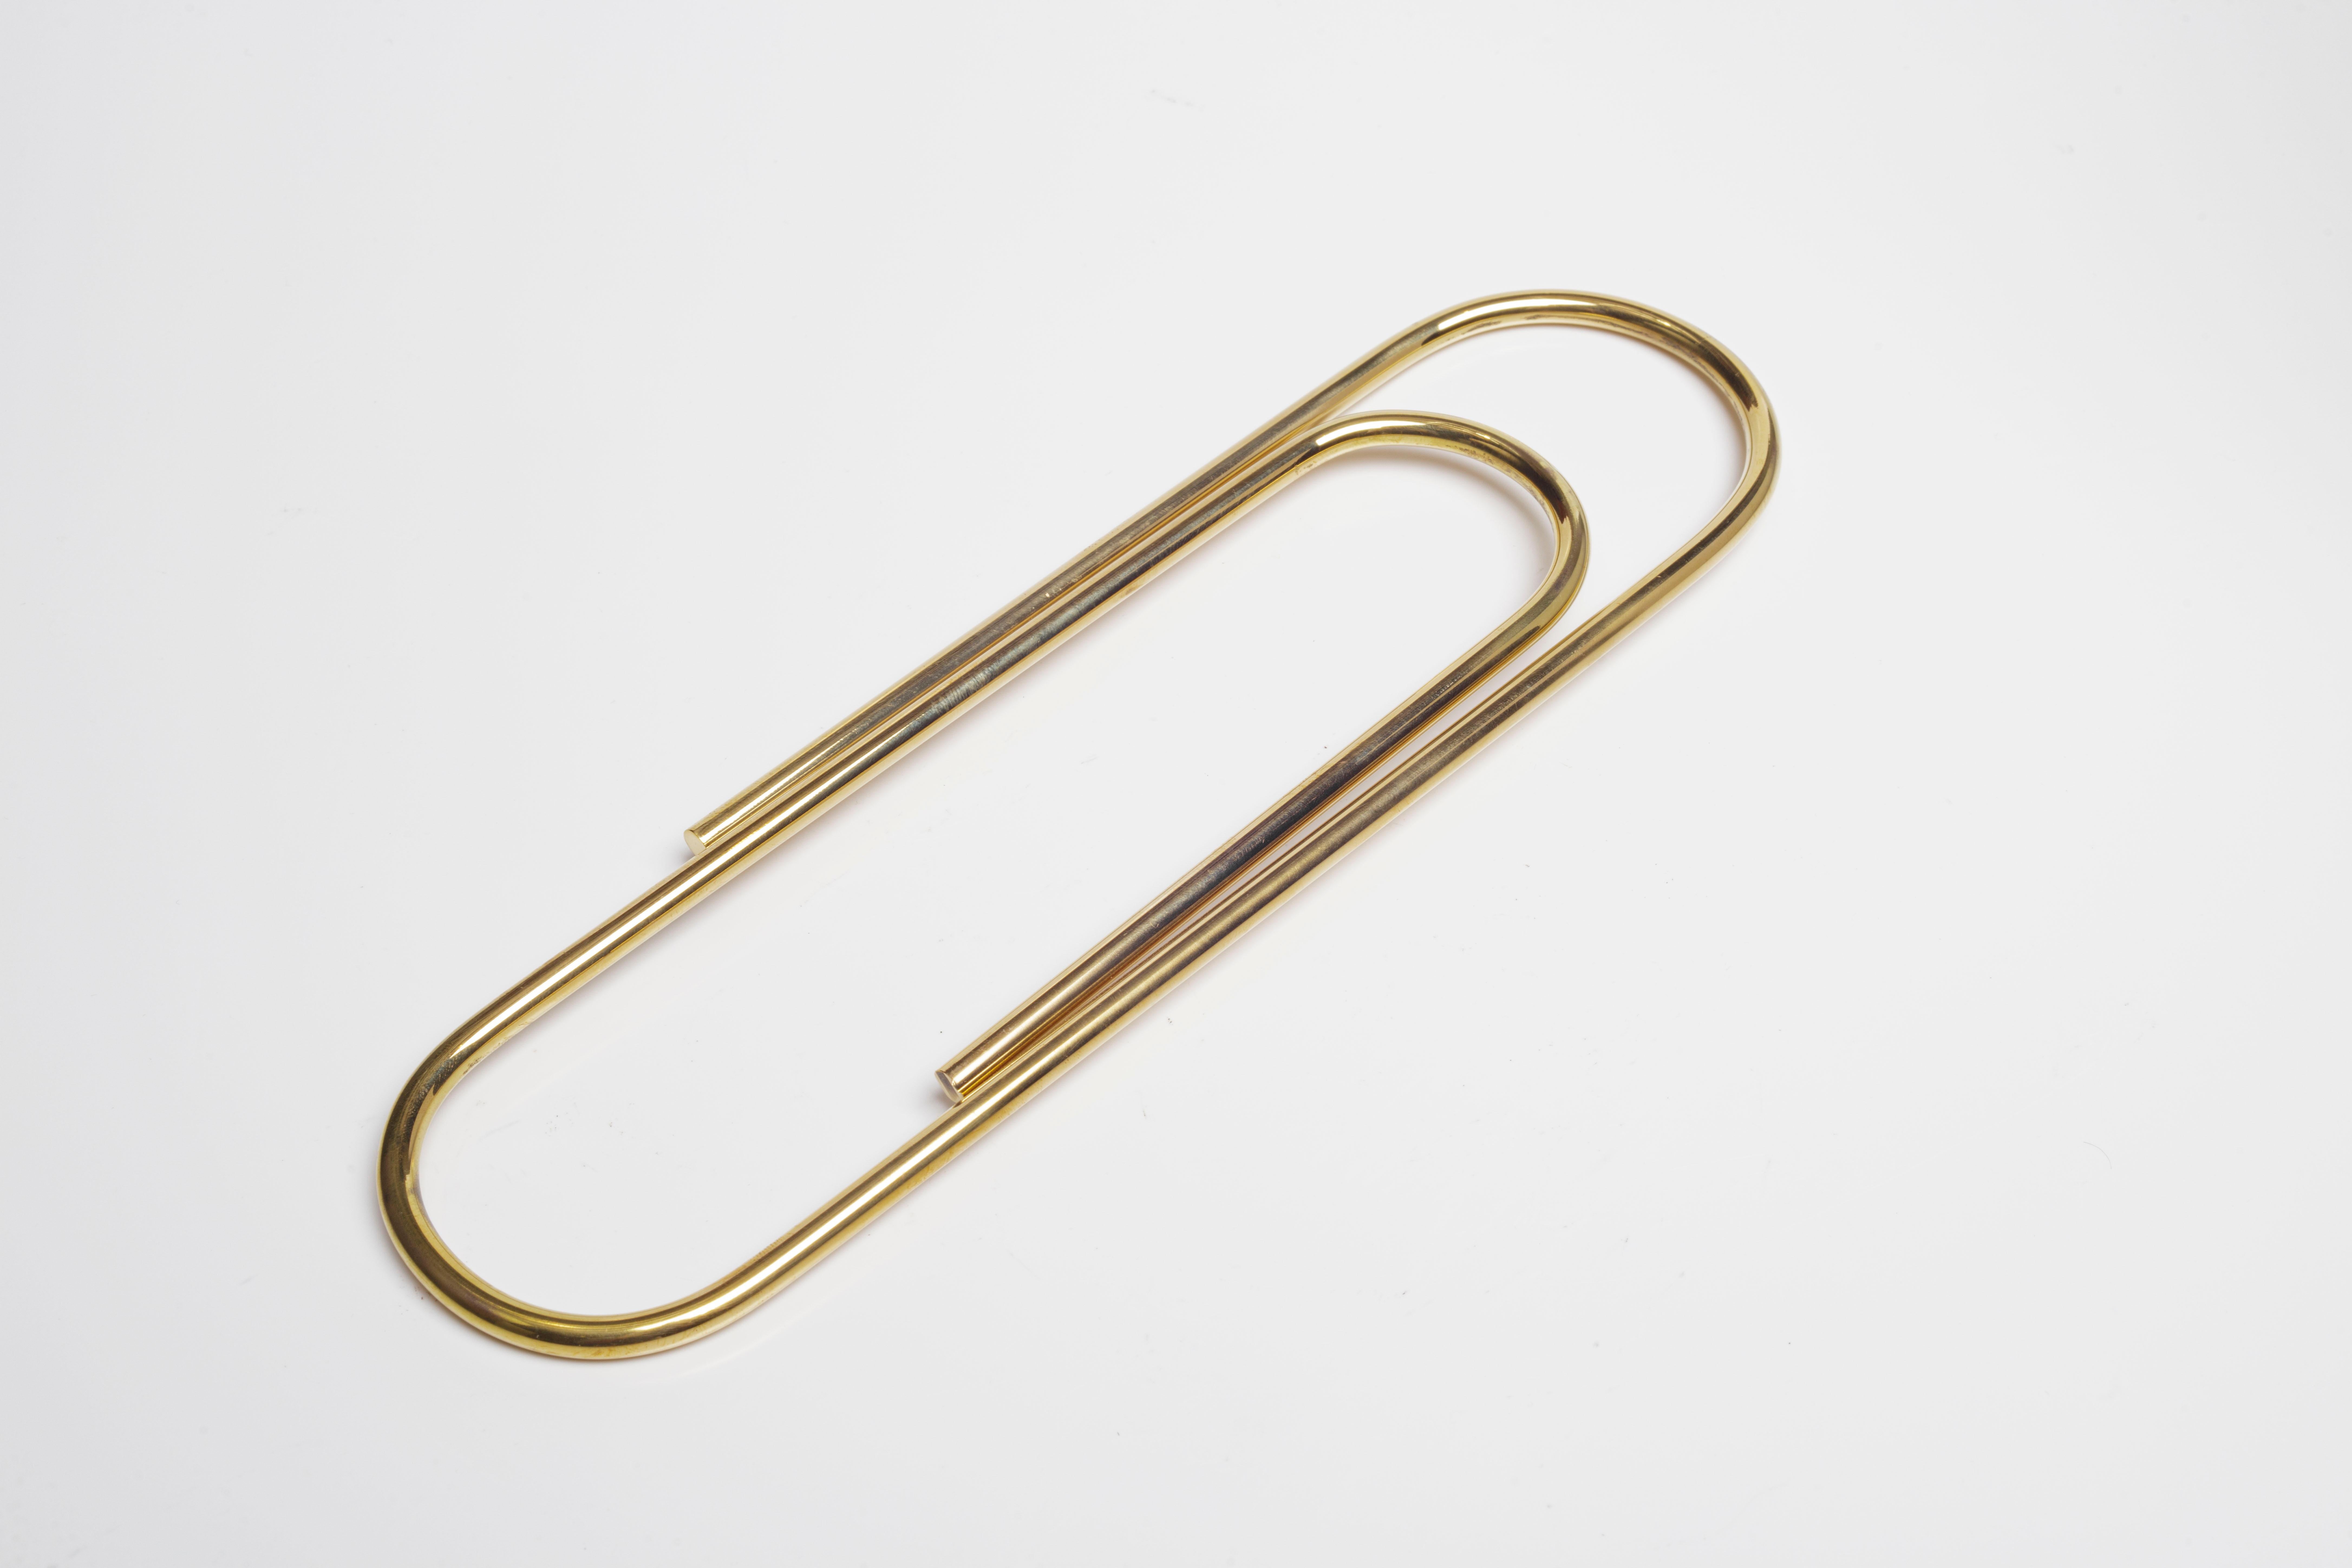 Contemporary Carl Auböck Paperweight #4751-1 Paperclip, Austria For Sale